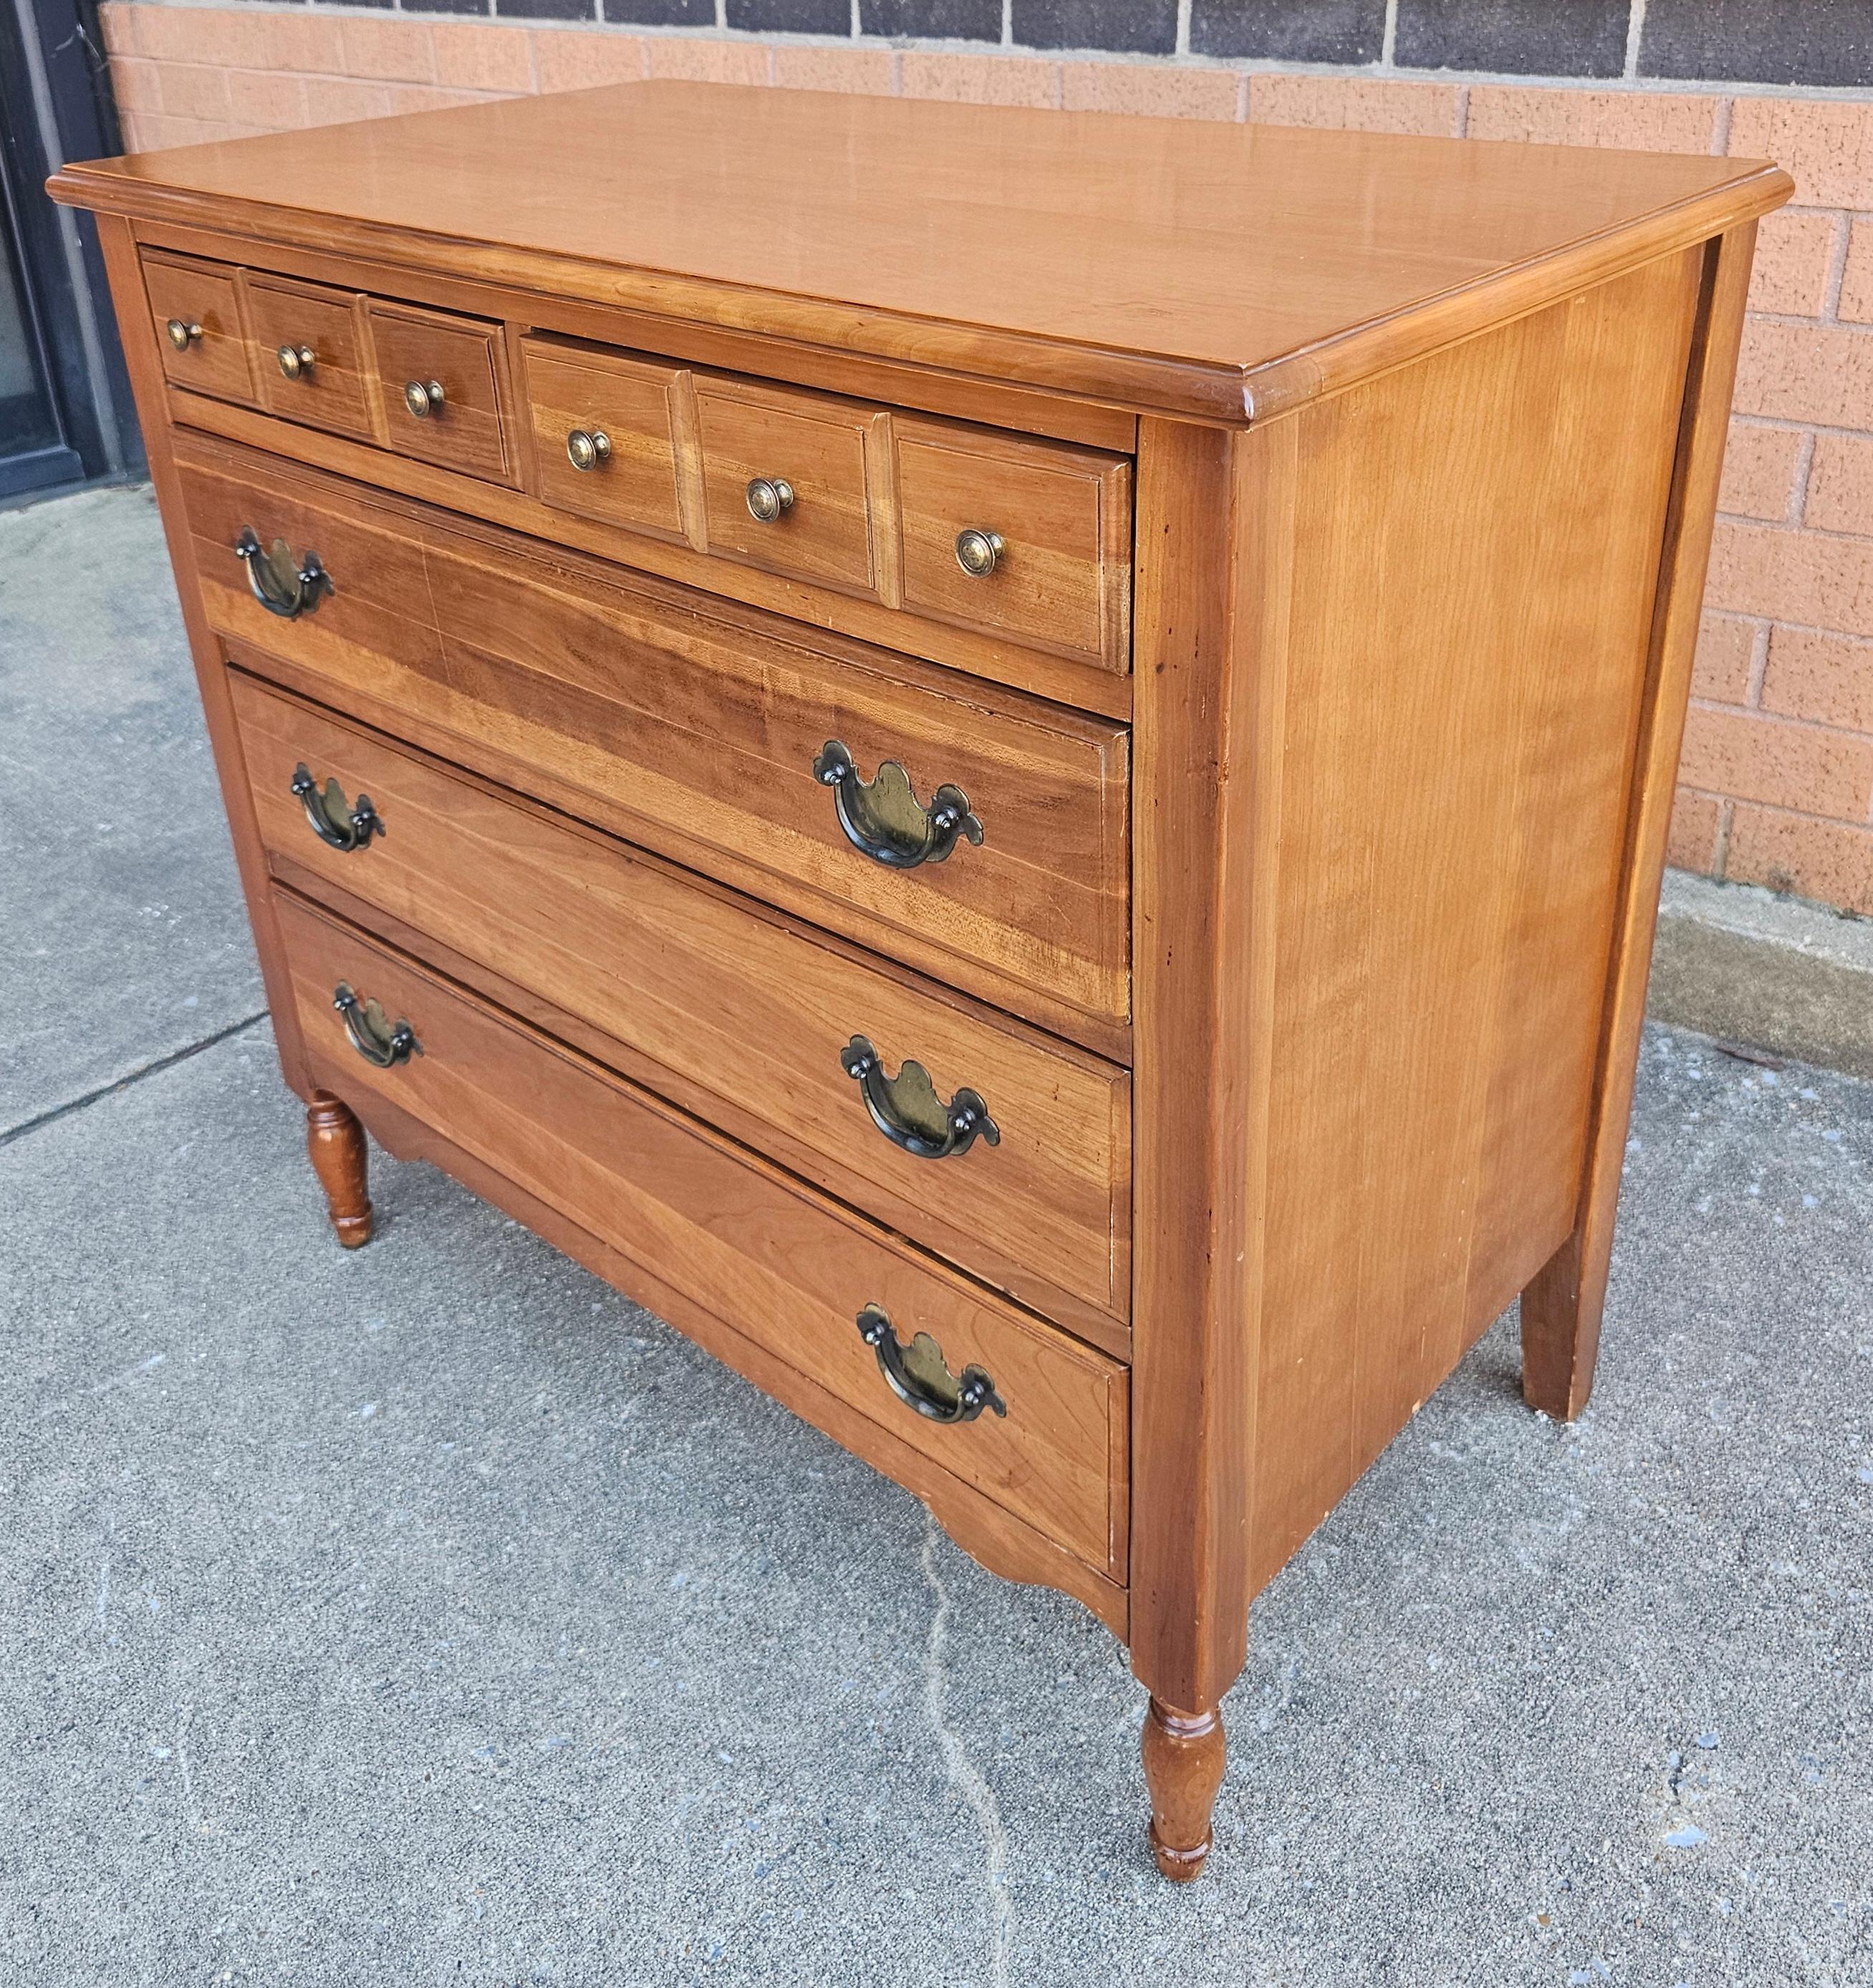 Mid-Century Modern Mid 20th C. Permacraft Sanford Furniture Five-Drawer Bachelor Chest of Drawers For Sale